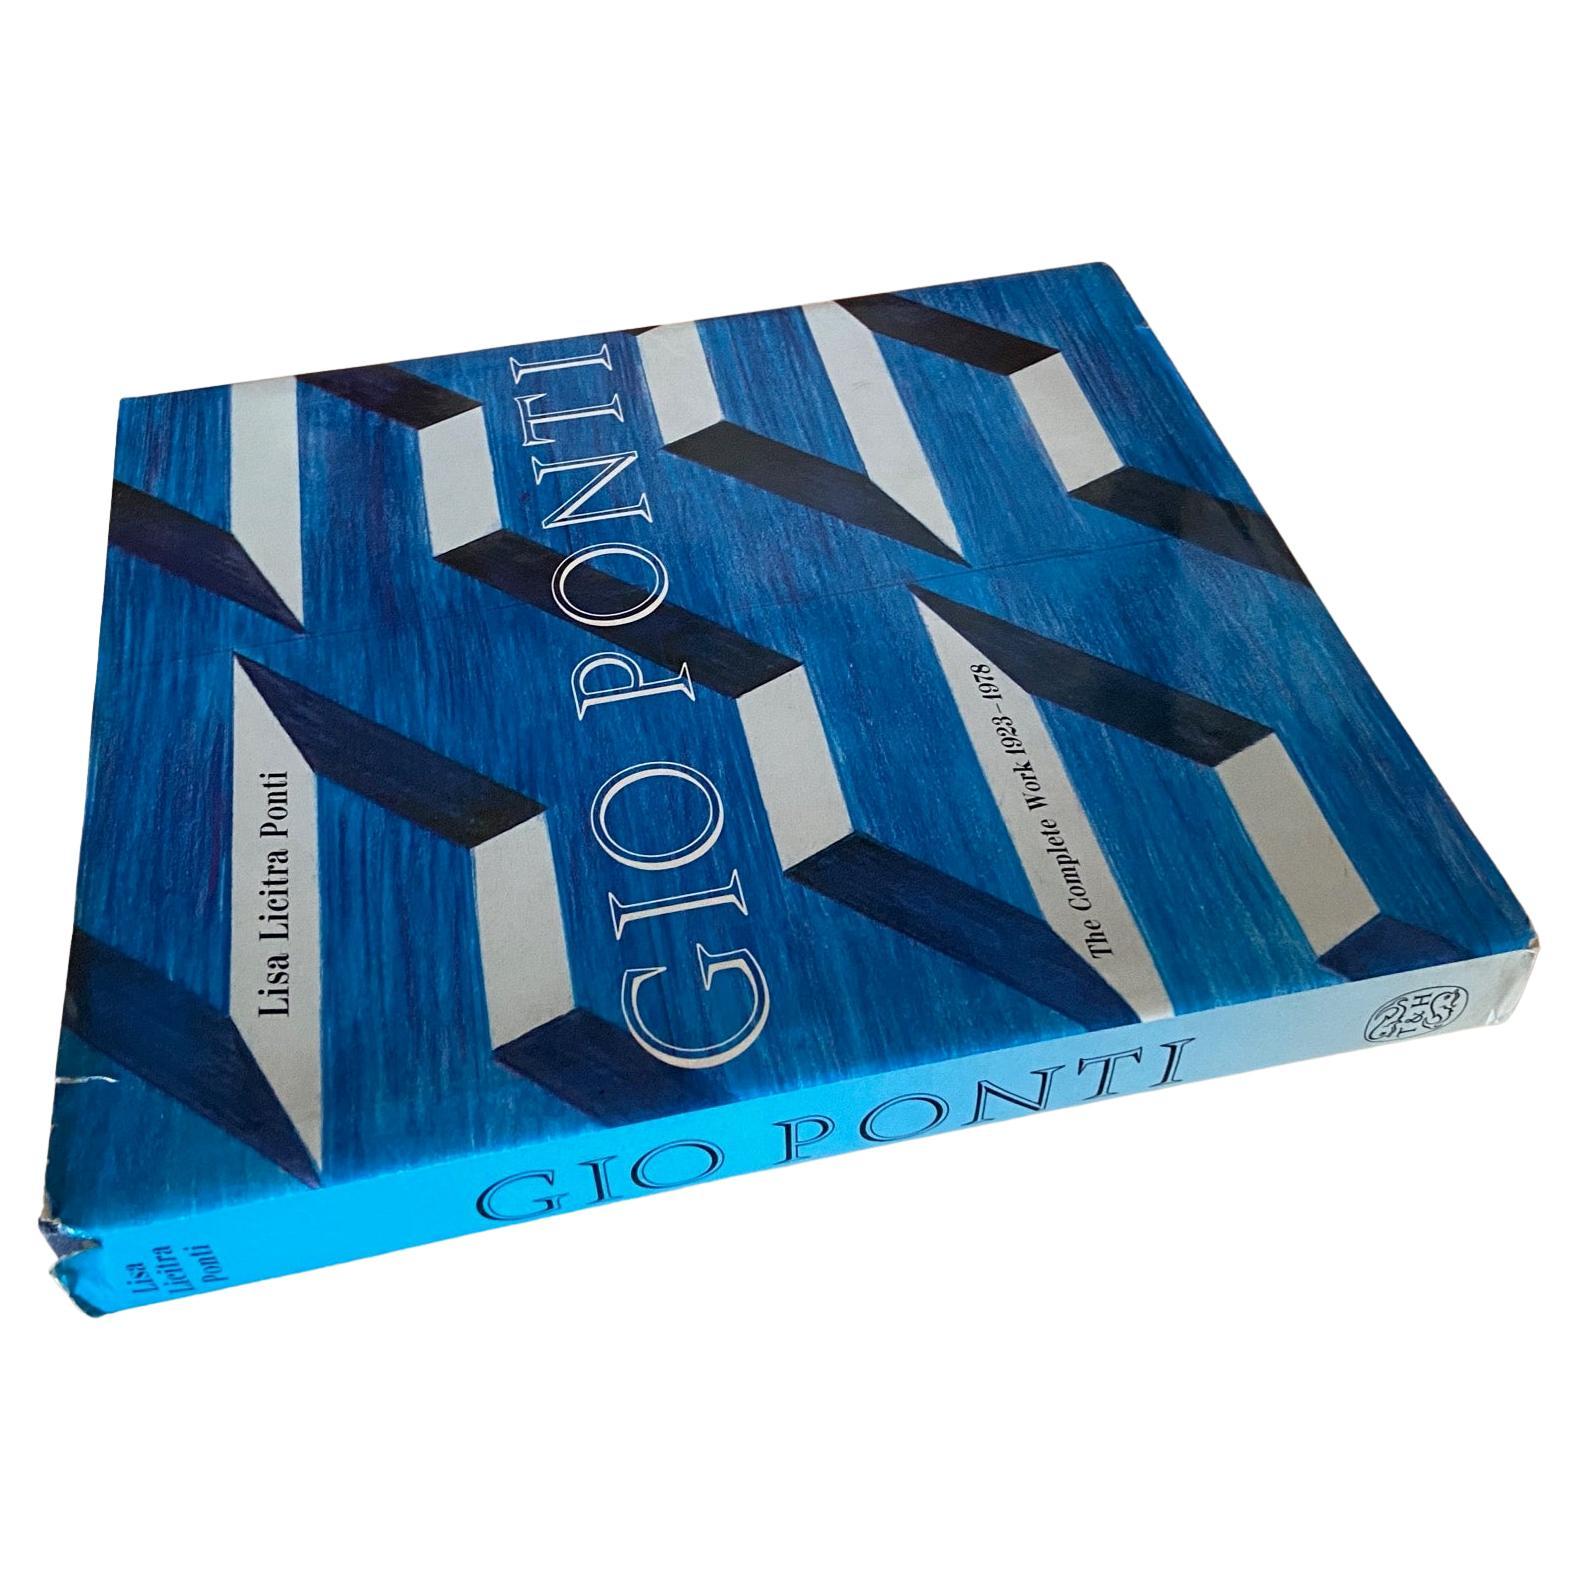 20th Century Gio Ponti, The Complete Work 1923-1978,  hardback book, 1990, Thames and Hudson For Sale